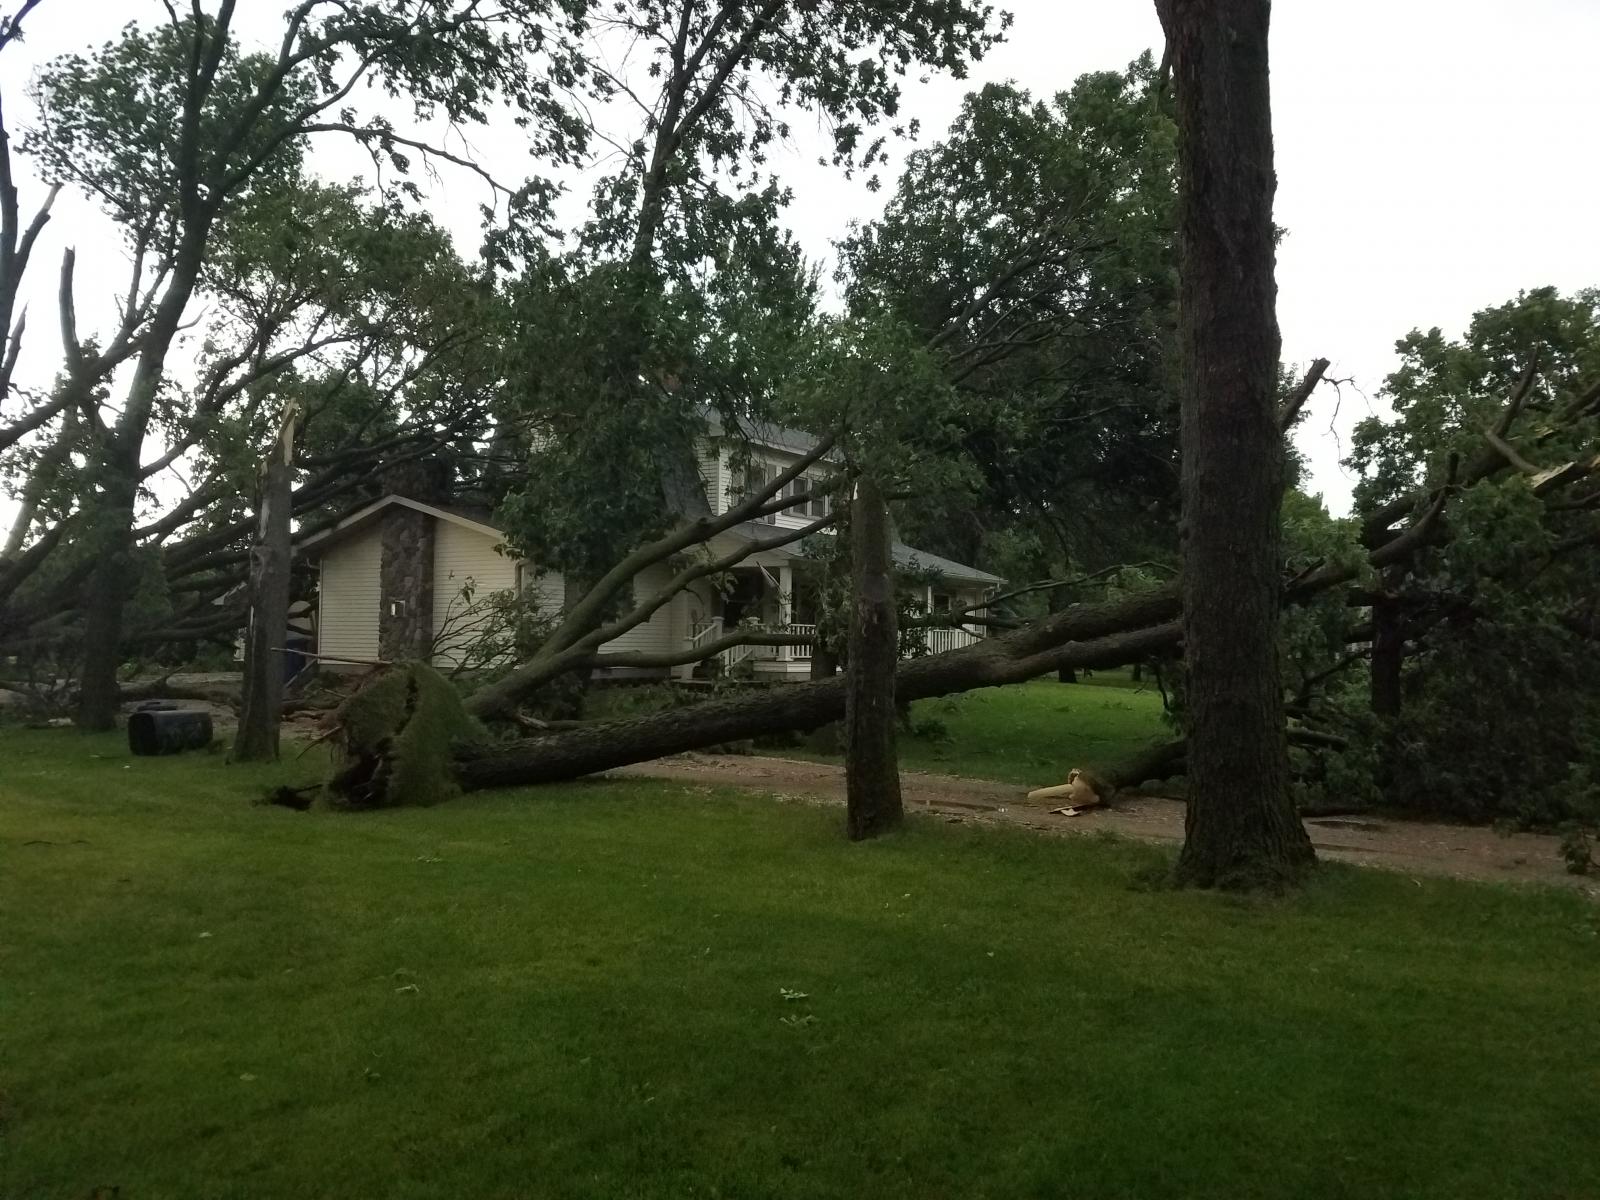 Uprooted tree in Clark, SD (Clark PD)